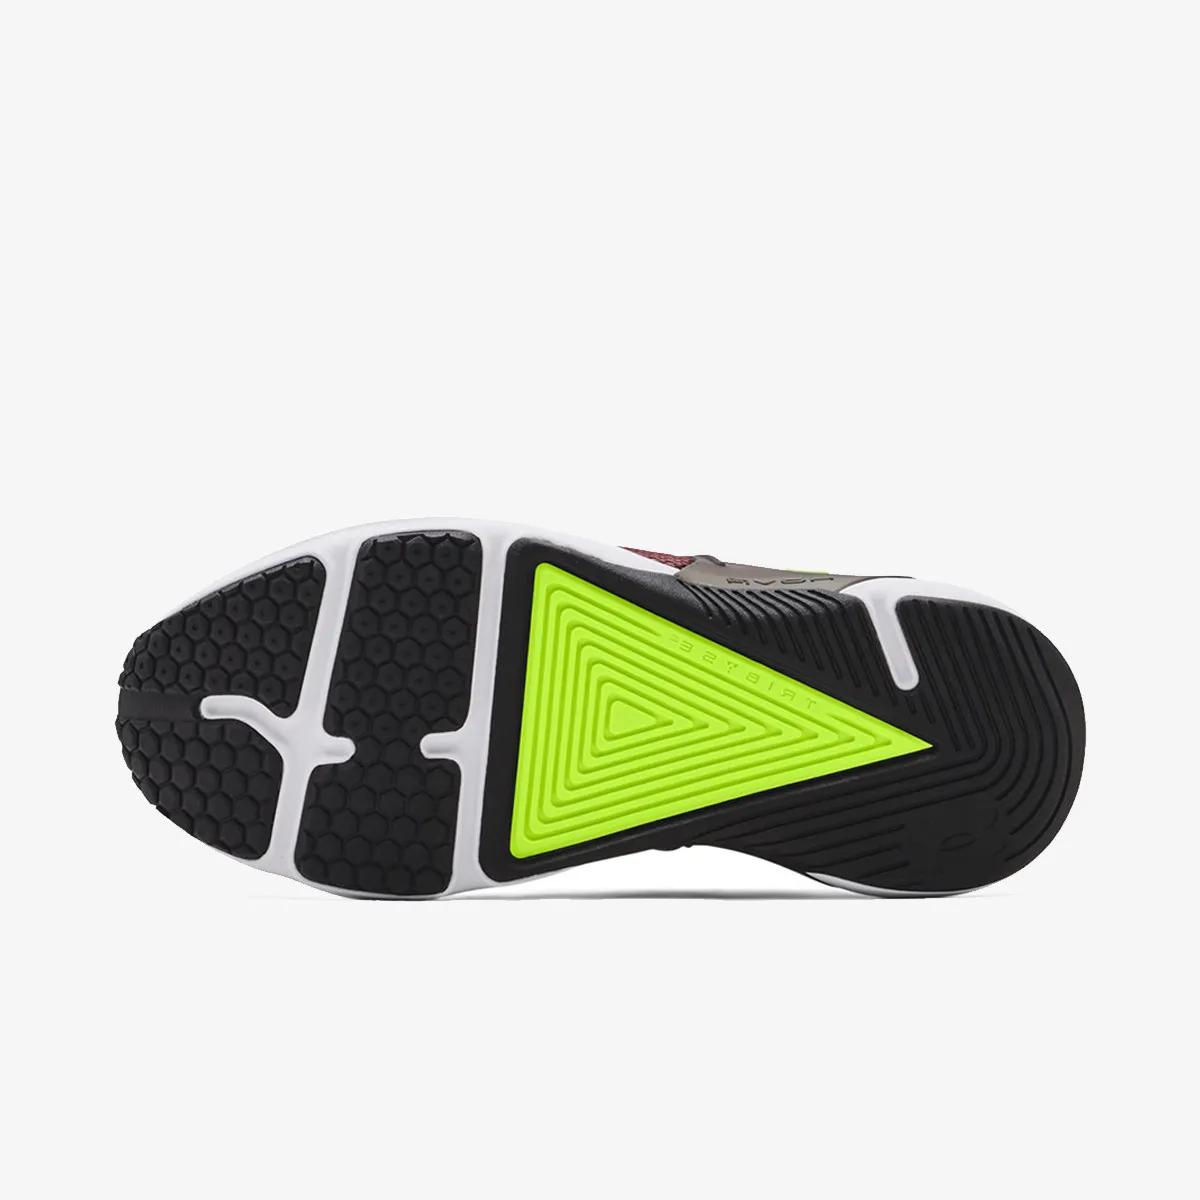 Under Armour Hovr™ Apex 3 Training Shoes 